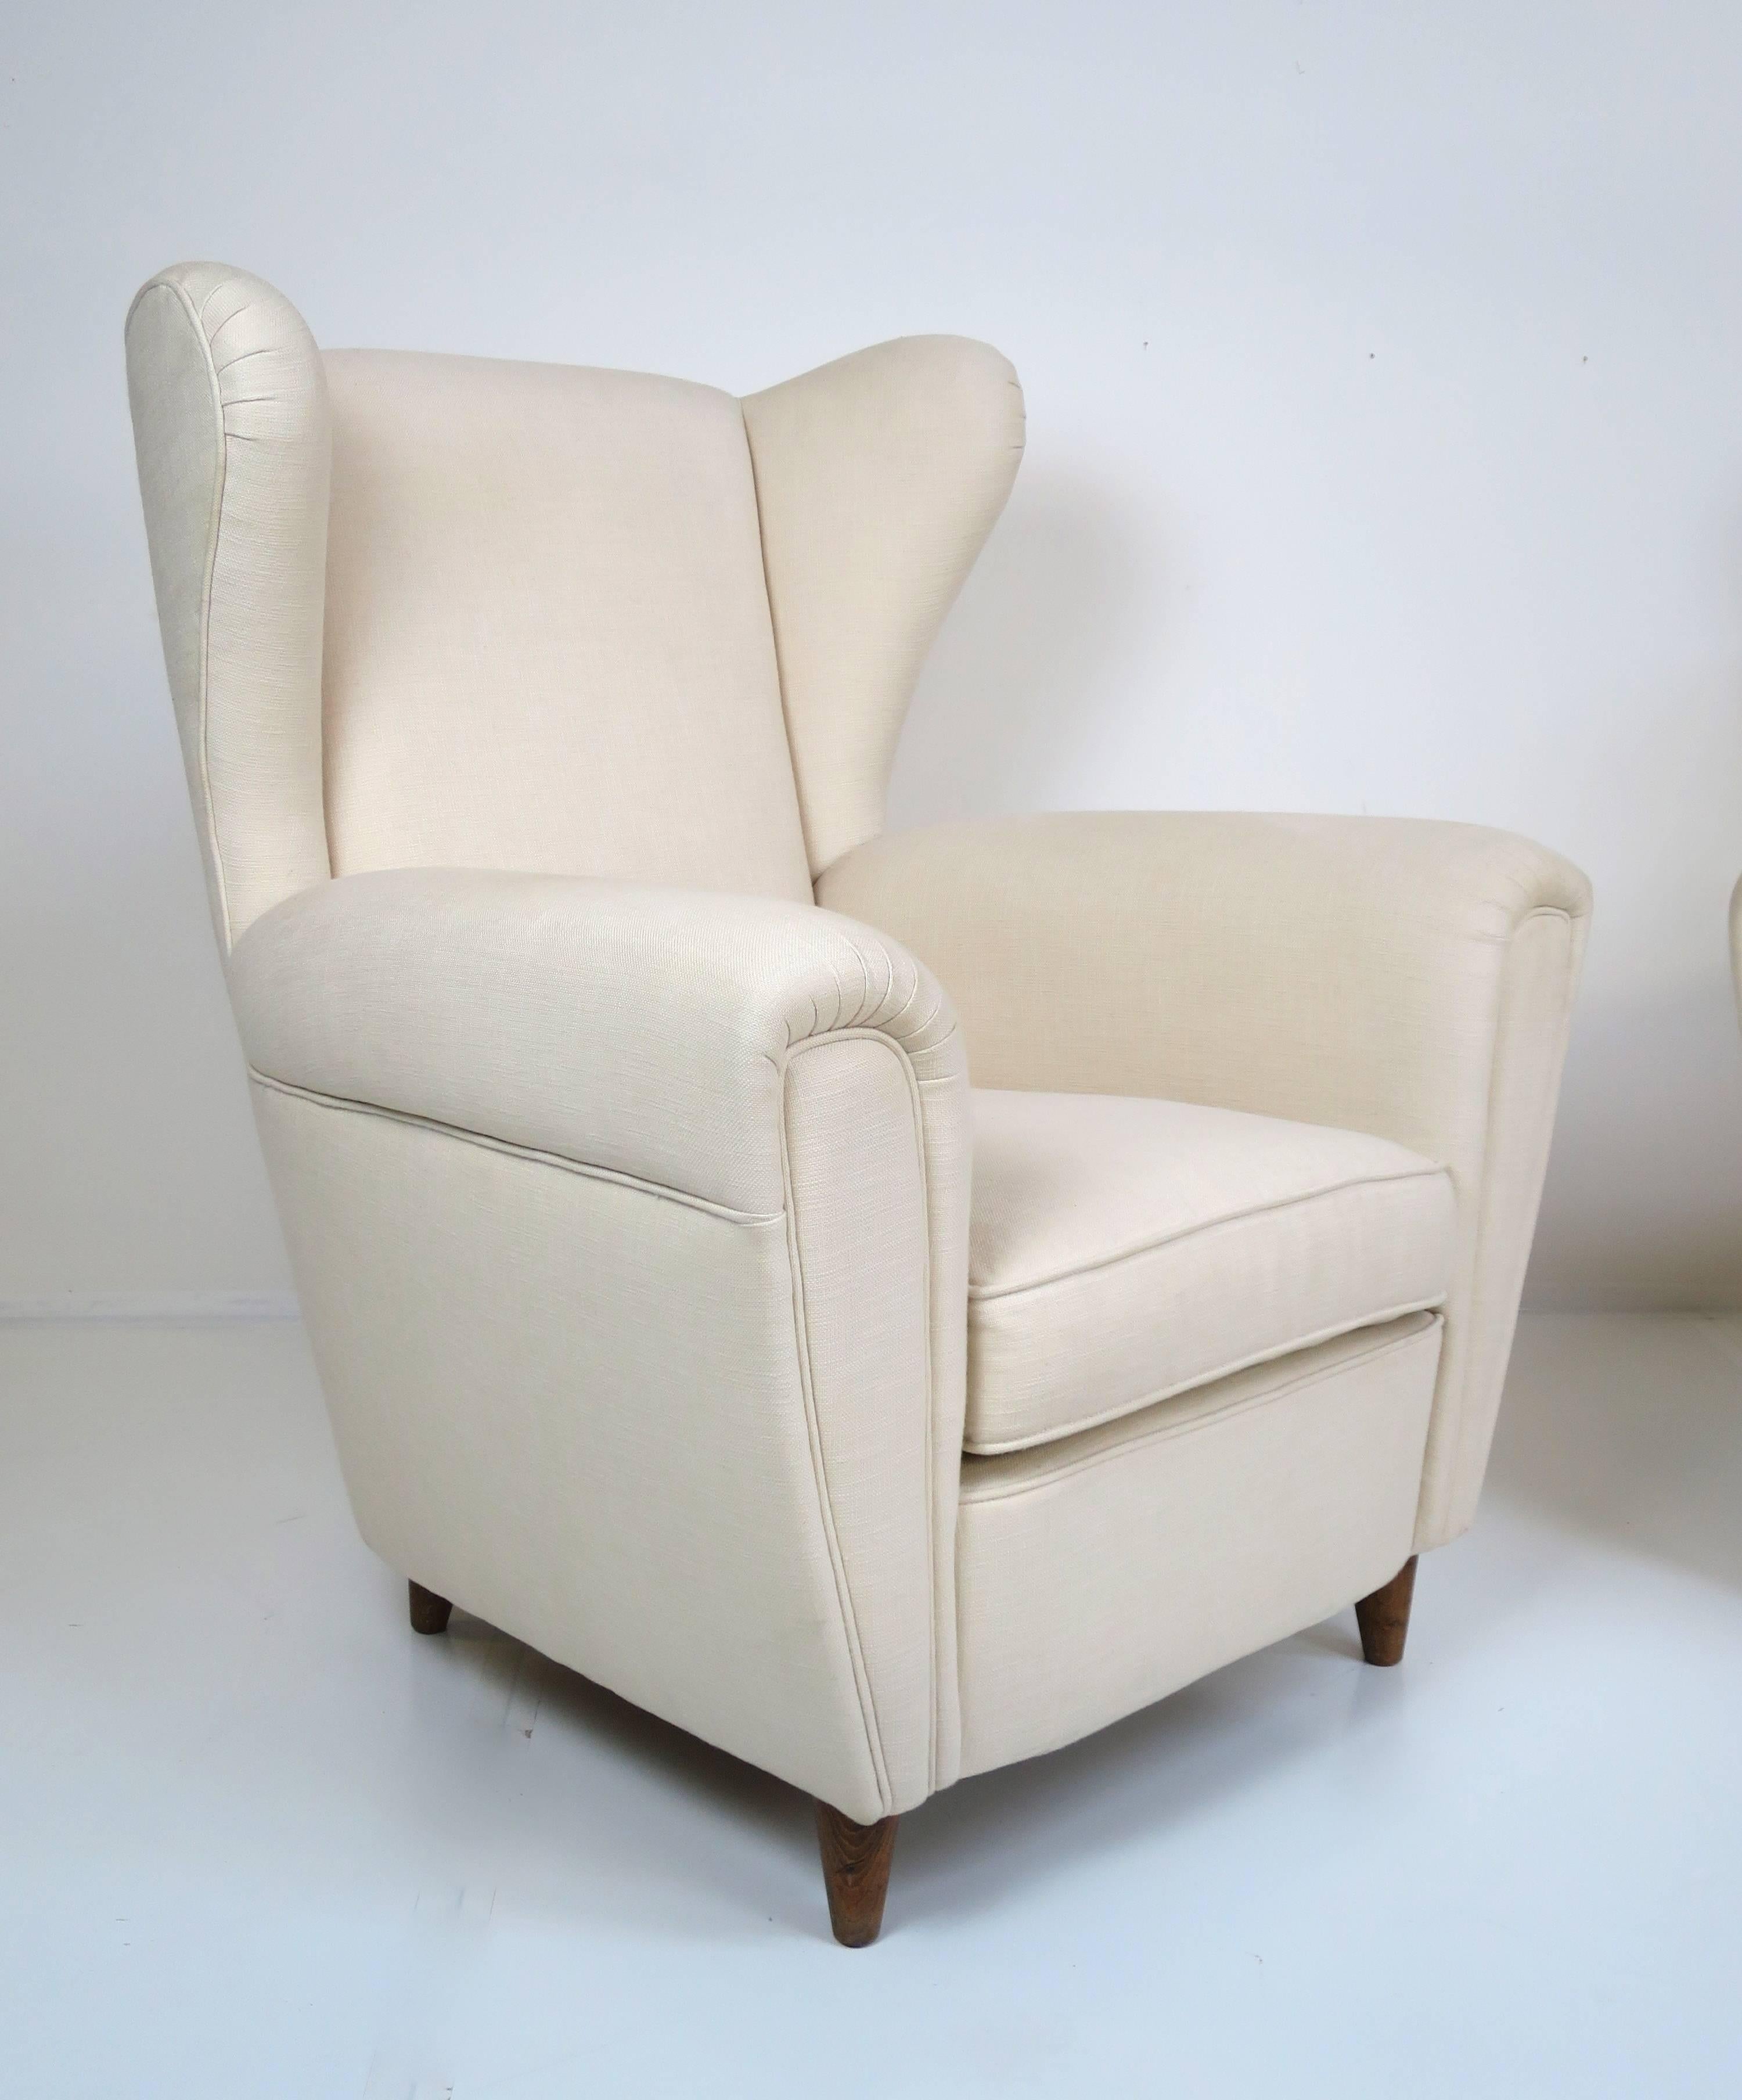 Mid-20th Century Stylized Italian Wingback Pair of Large Chairs, circa 1949